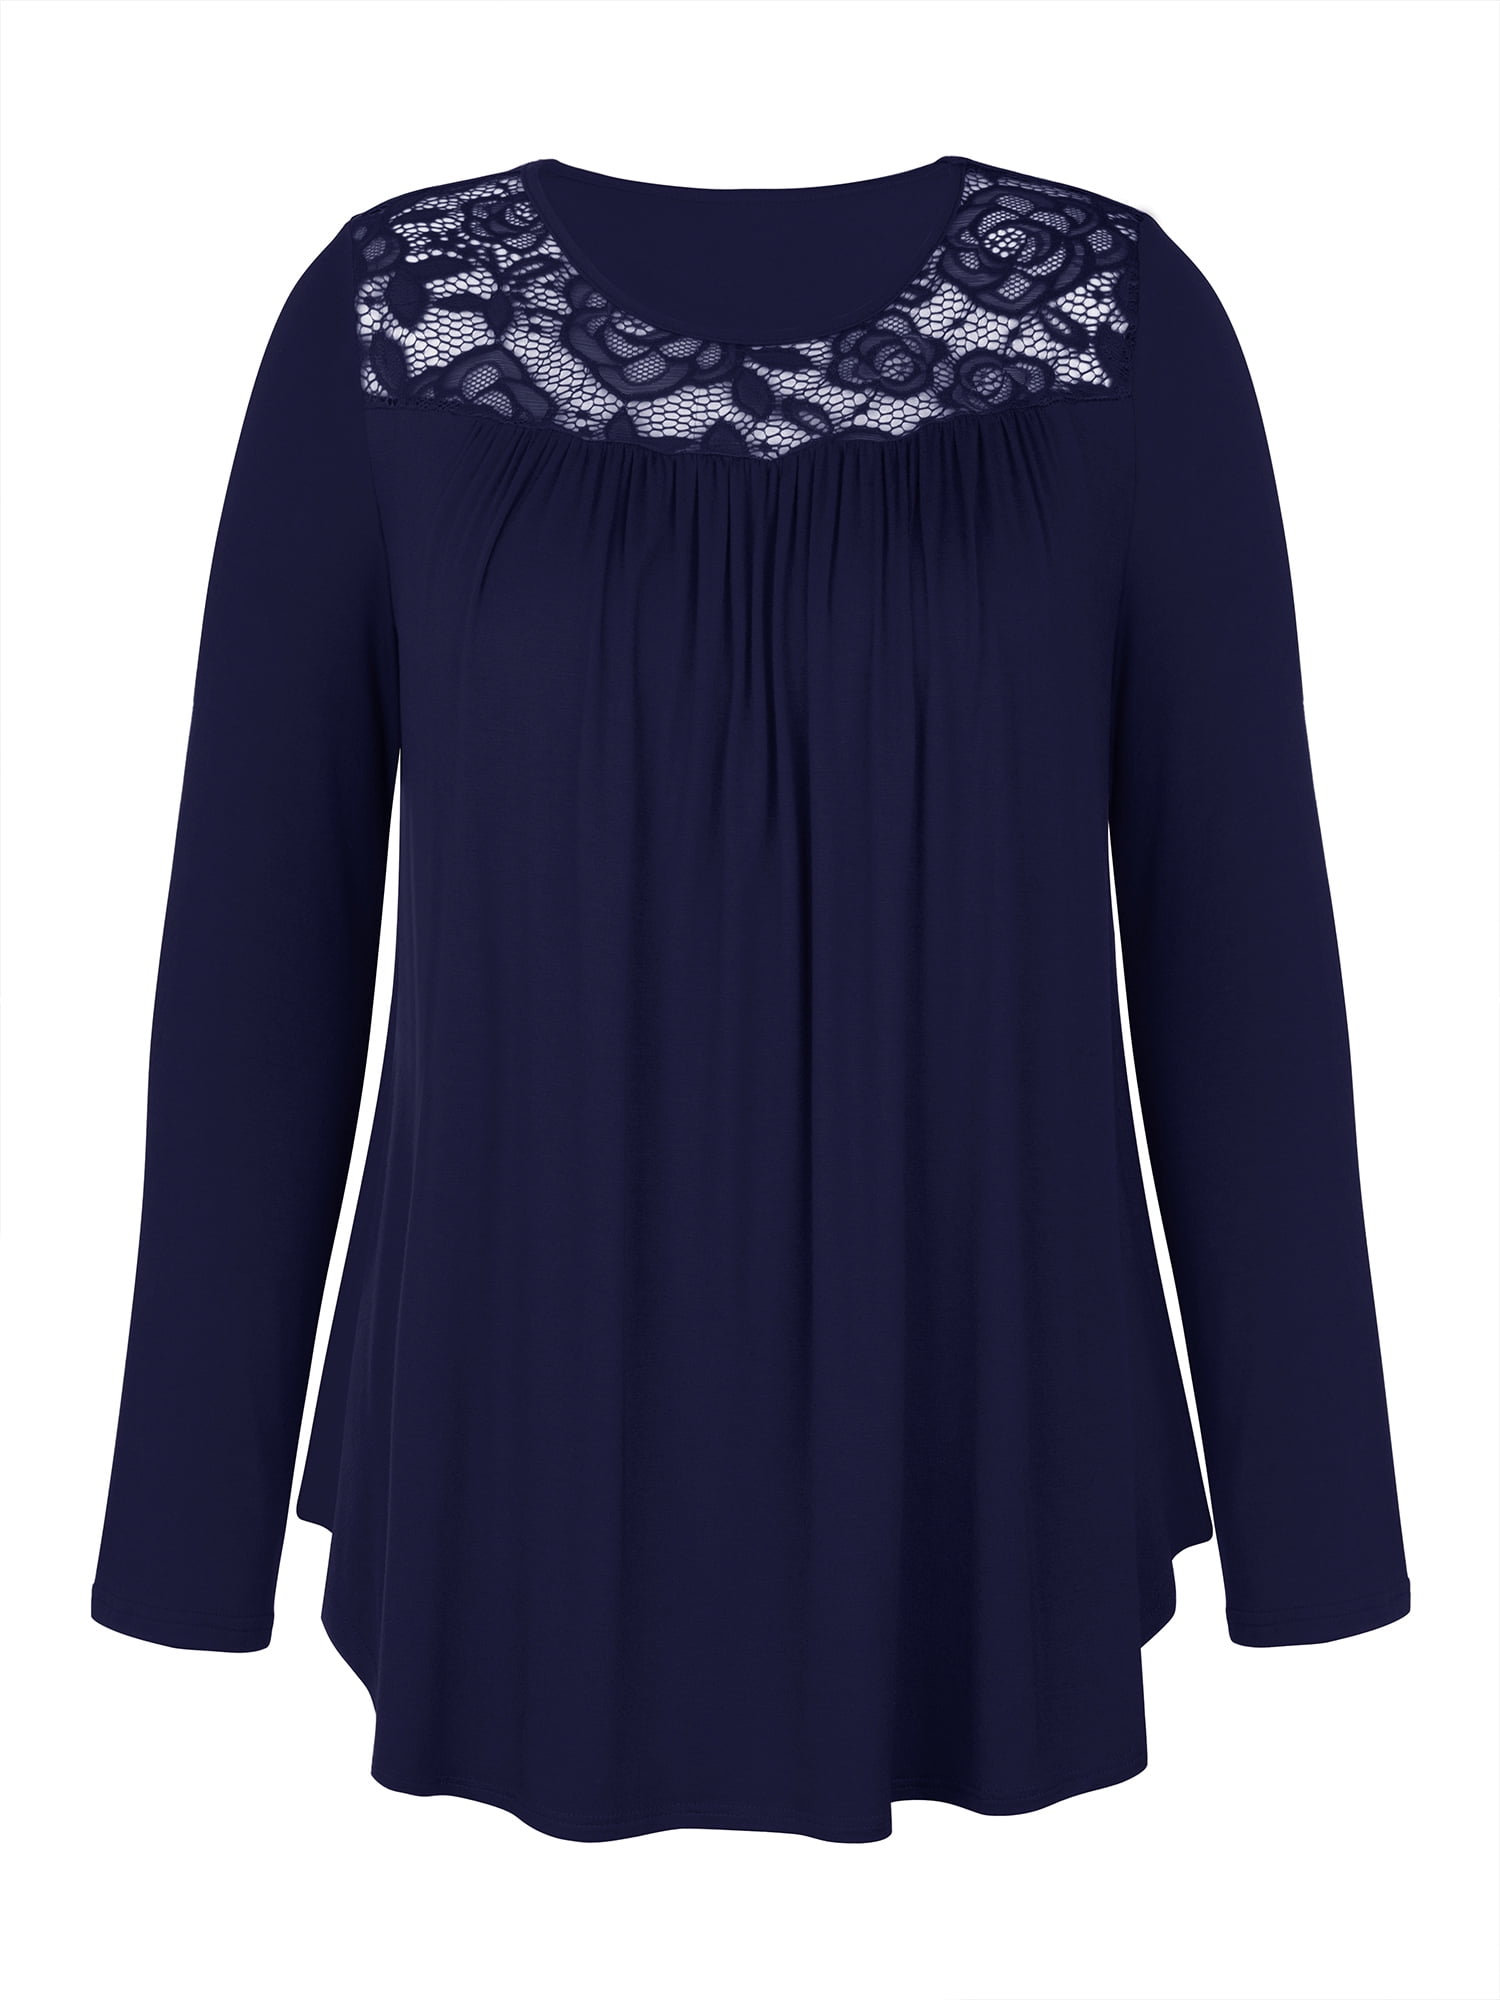  LIENRIDY Women Plus Size Tops Casual Blouses Lace Short Sleeve  Shirts for Women, Aicd Blue, M : Clothing, Shoes & Jewelry